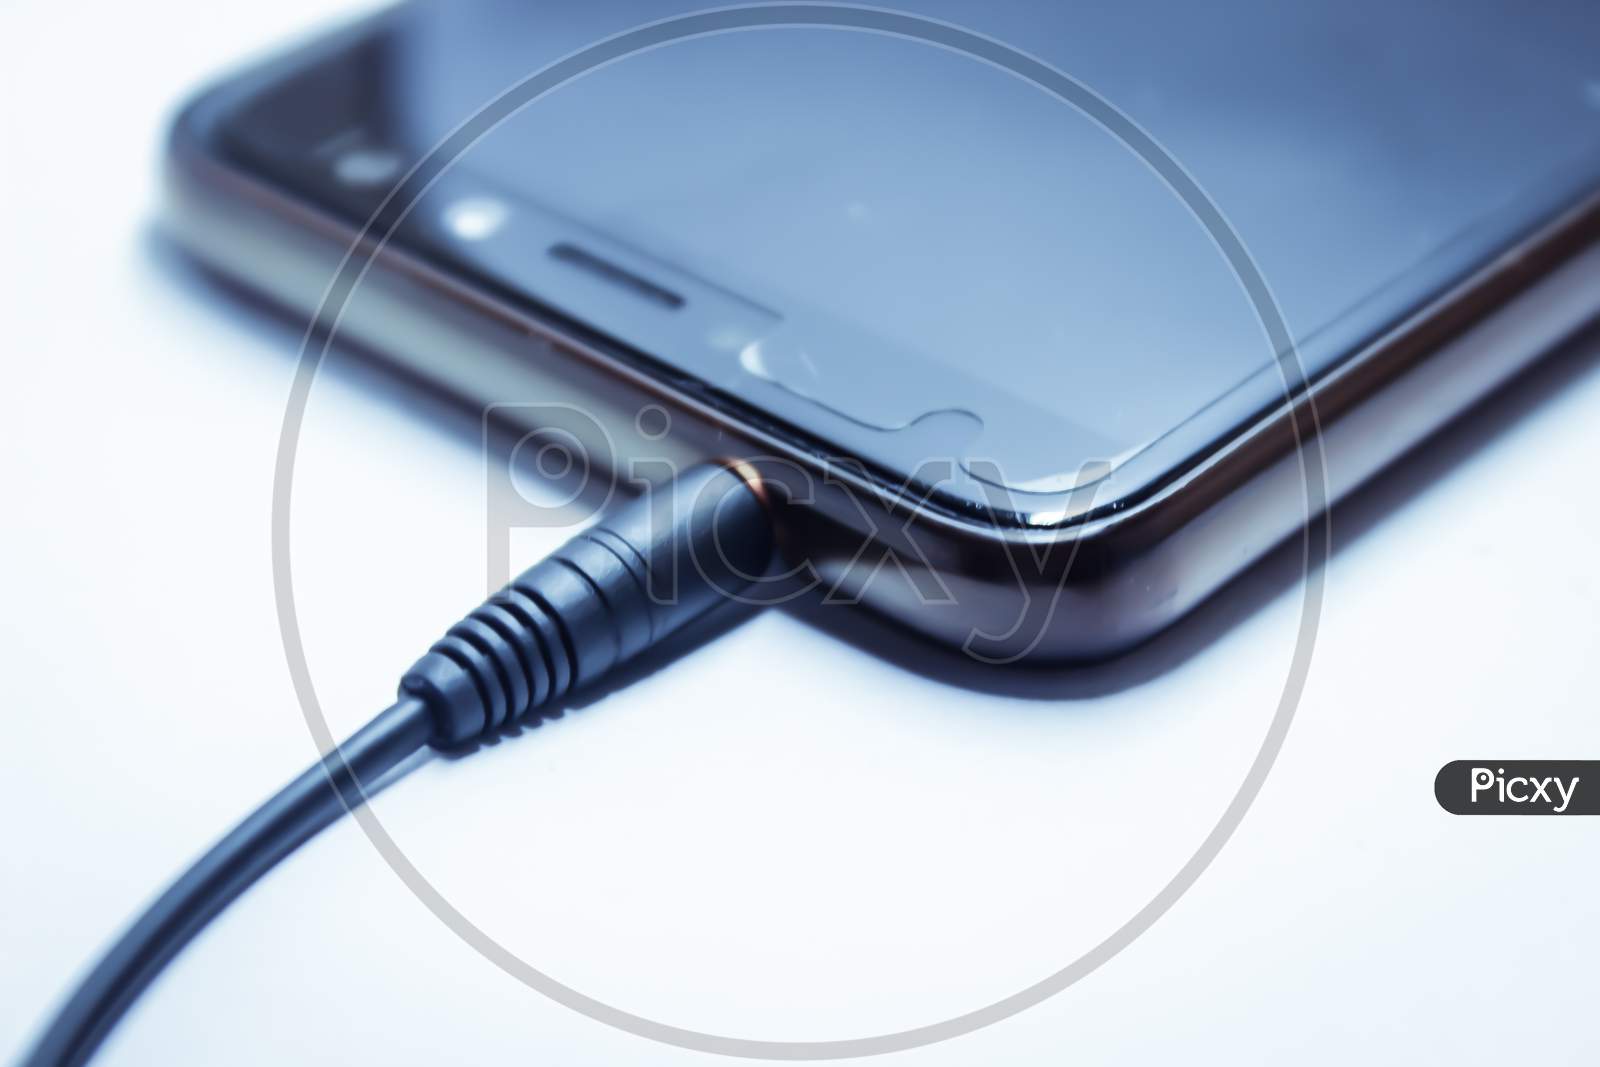 Earphones Jack Connected To an Smart Phone Over an Isolated White Background